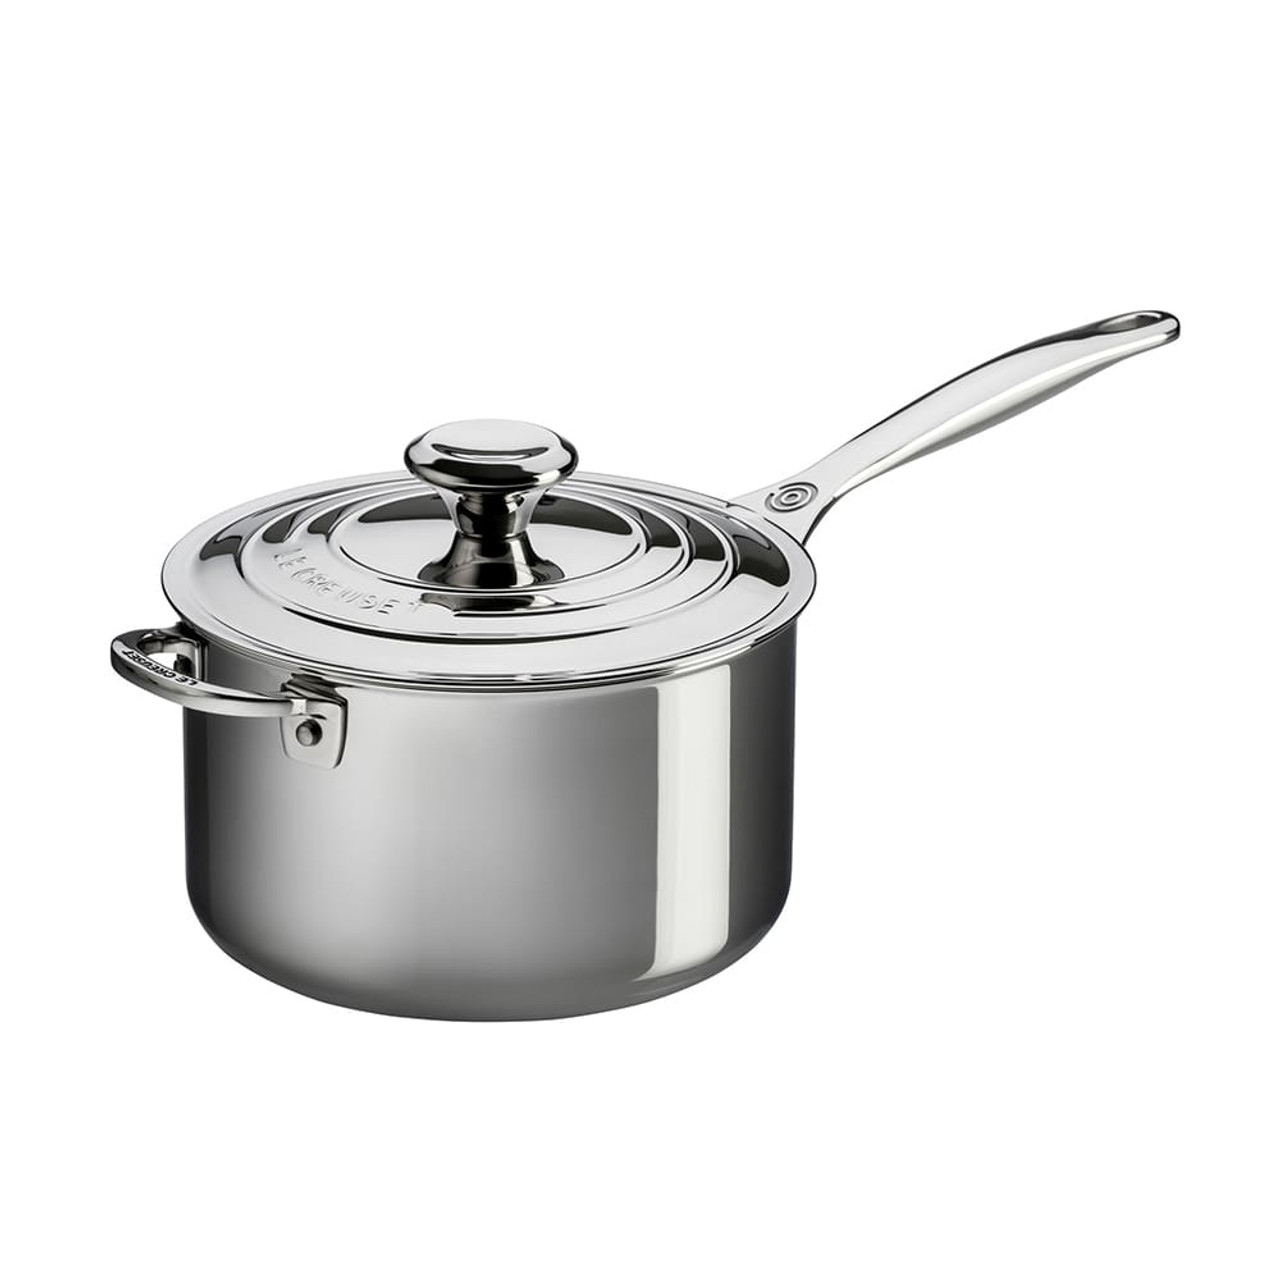 https://cdn11.bigcommerce.com/s-hccytny0od/images/stencil/1280x1280/products/3925/14292/le-creuset-stainless-steel-saucepan-4qt__83008.1612875240.jpg?c=2?imbypass=on